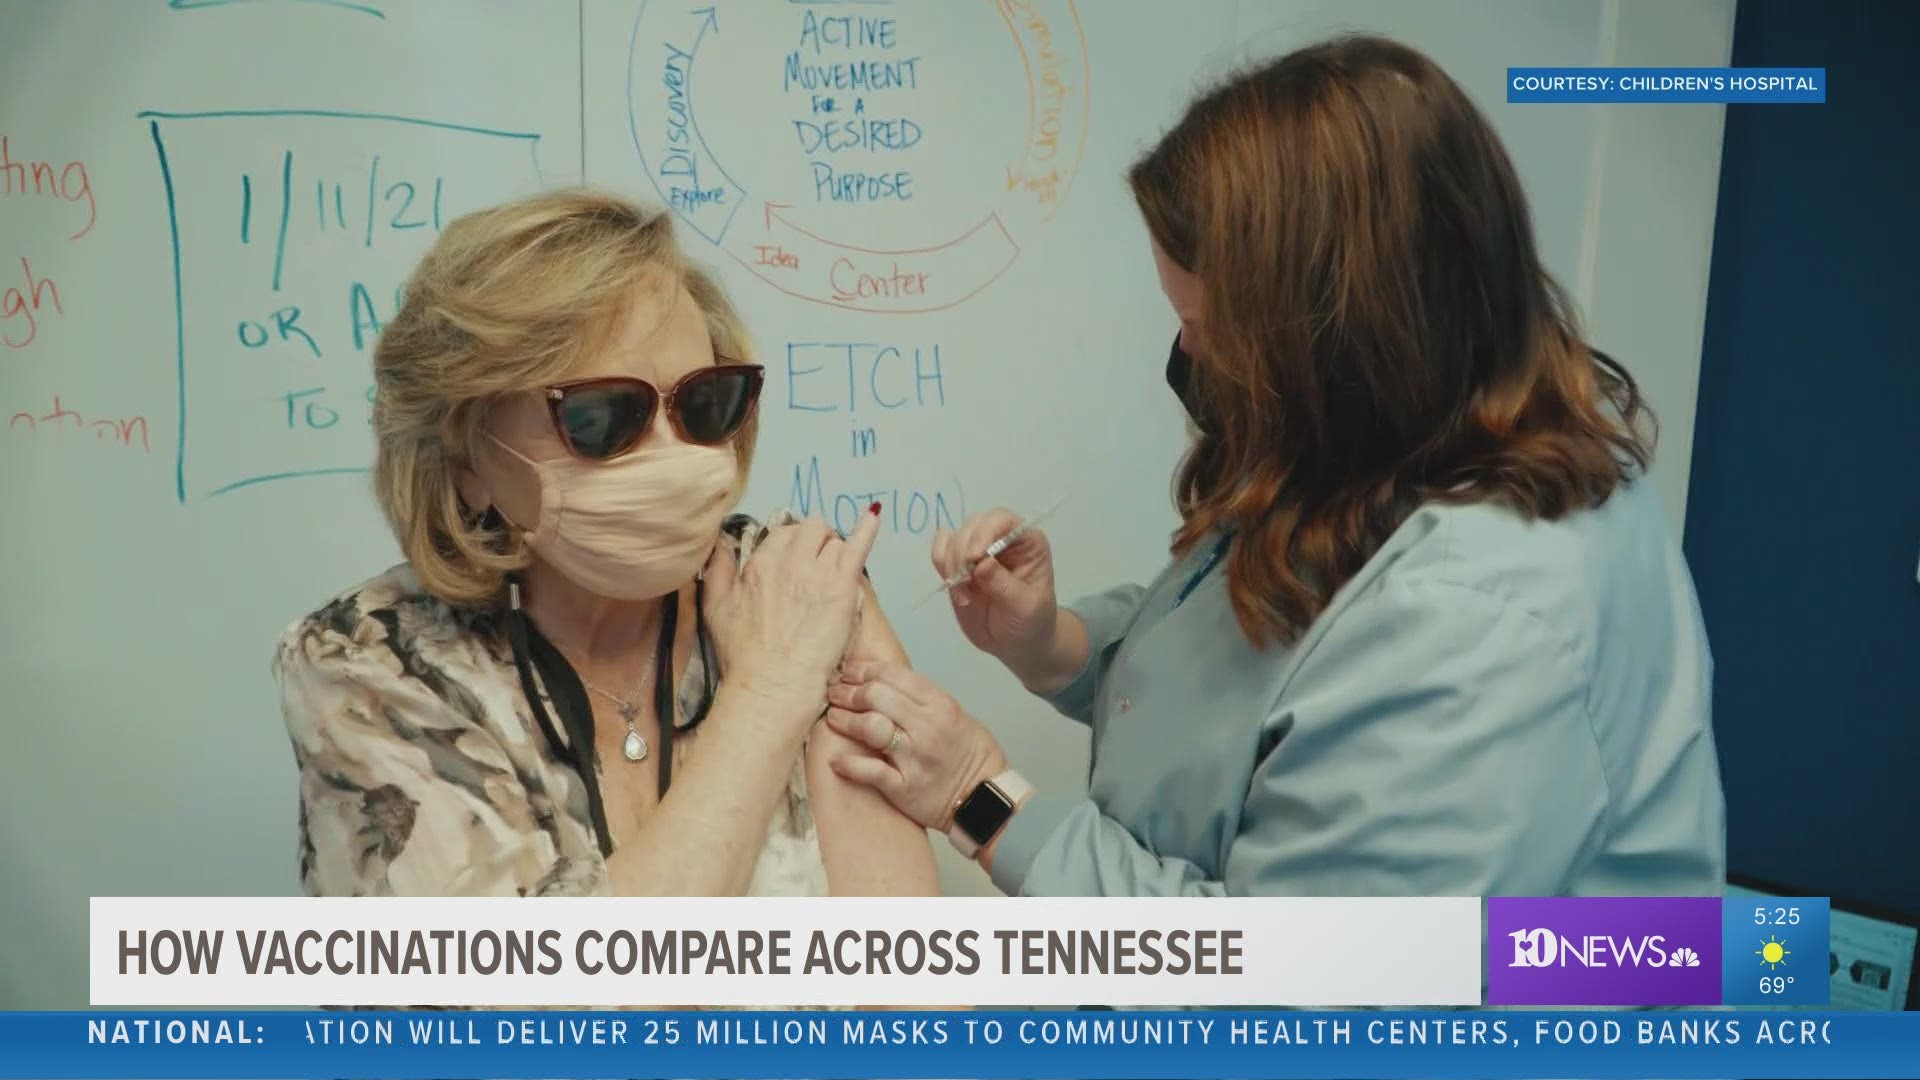 Roughly 11% of Tennesseans have now gotten their first dose of the COVID-19 vaccine.